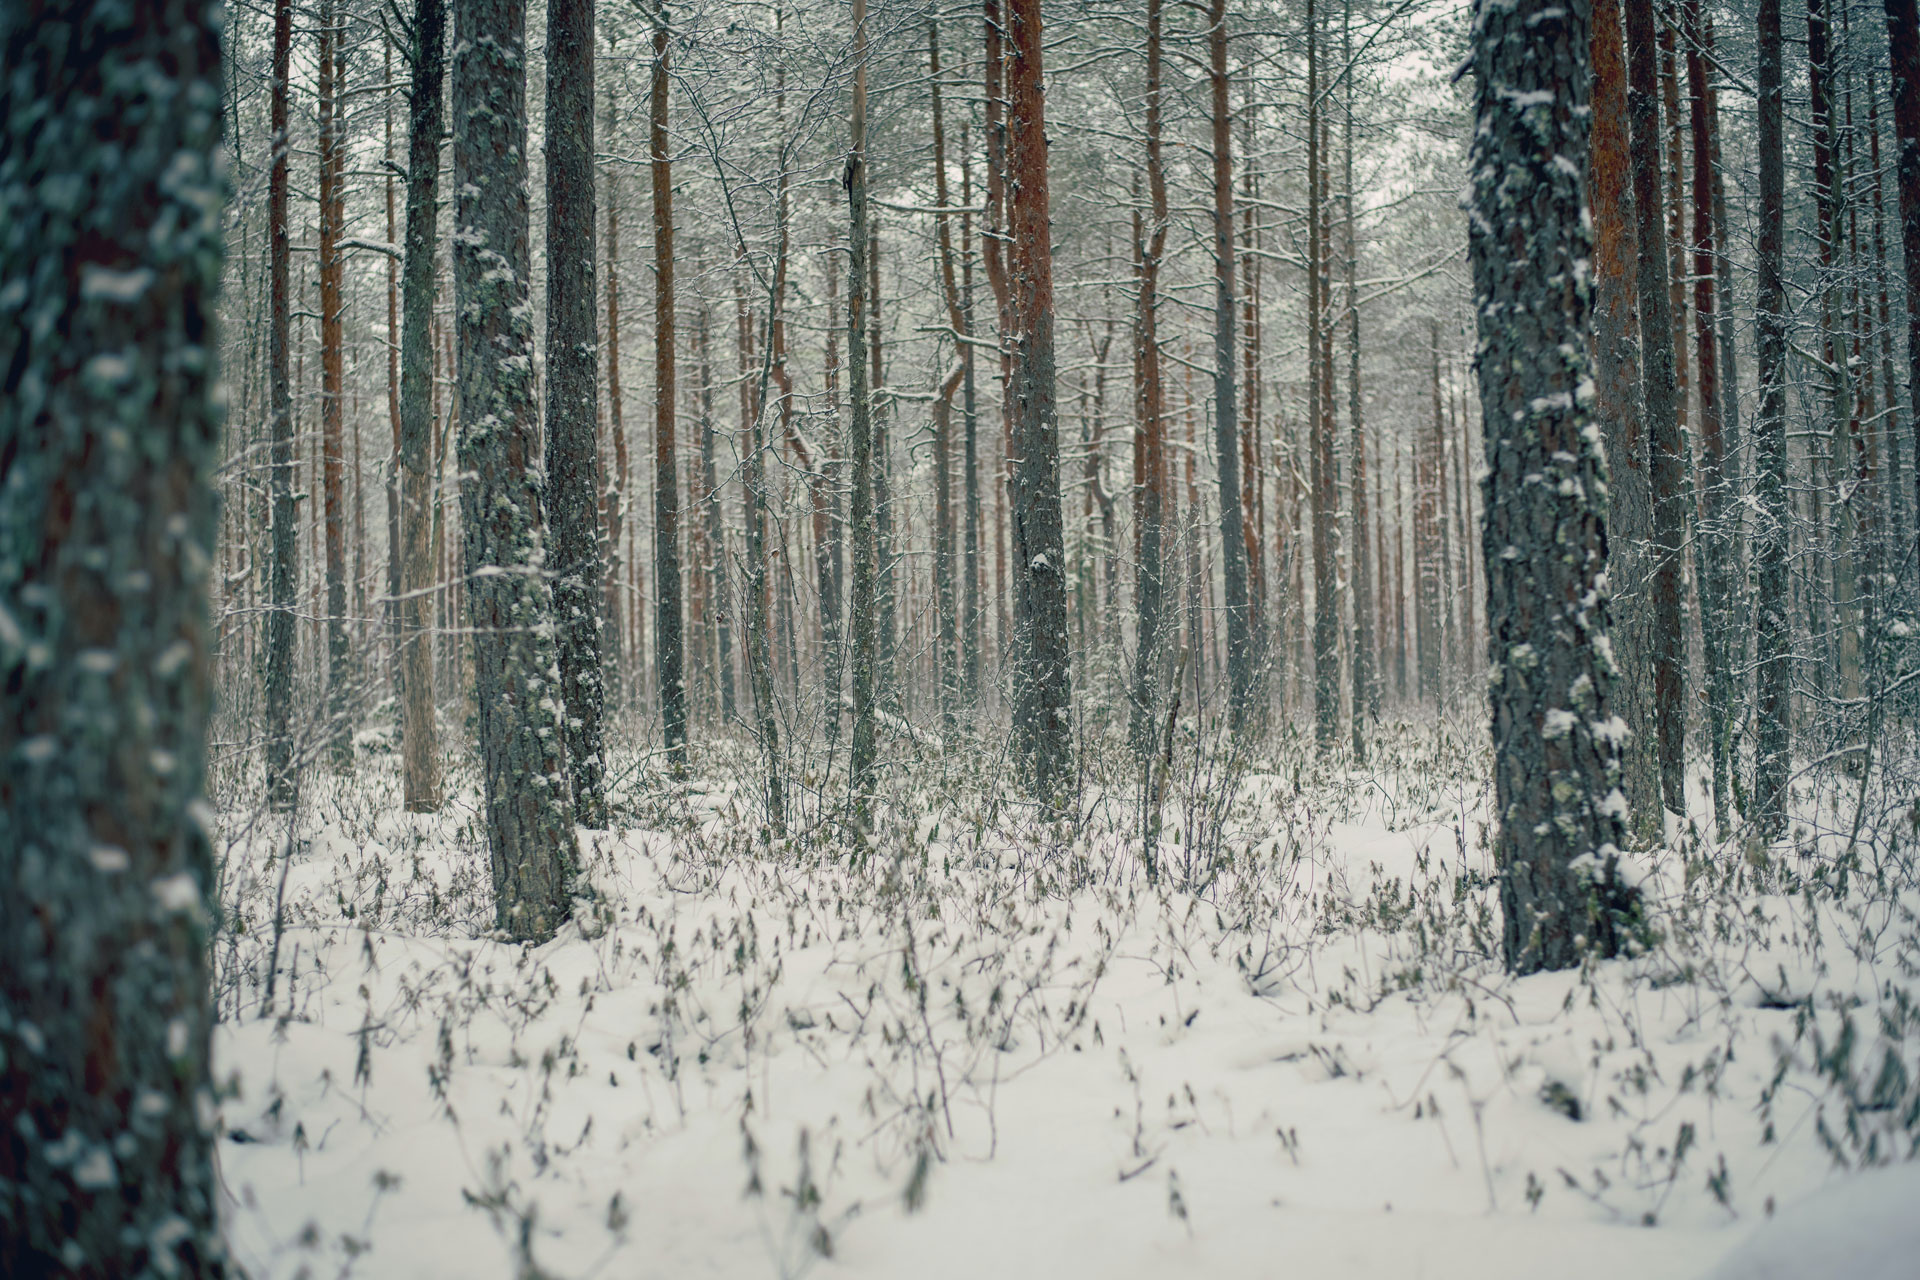 Snowy woods Featured image: by Aleksander Pedosk